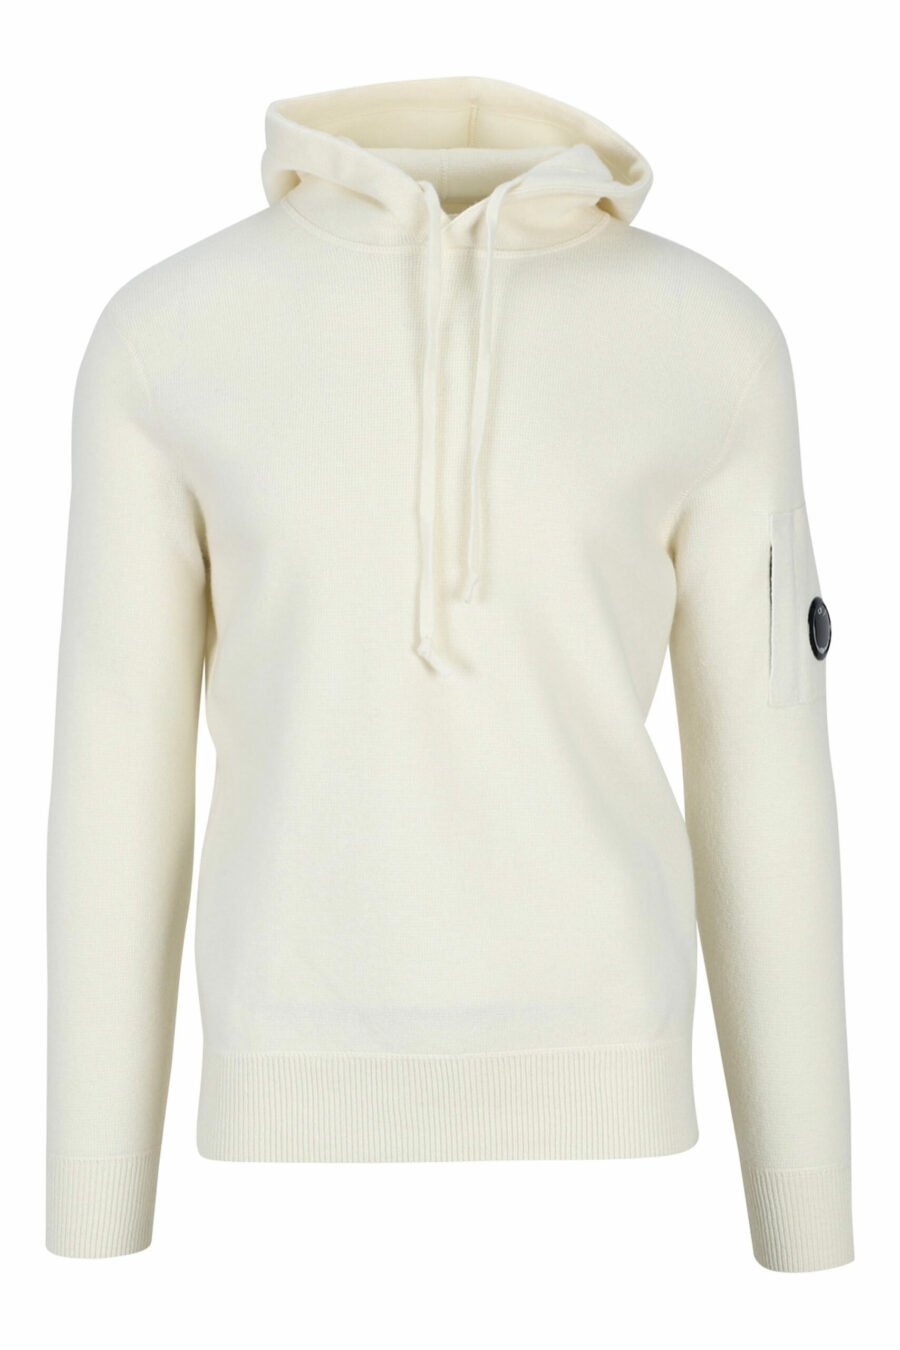 White hooded sweatshirt with side lens logo - 7620943634068 scaled